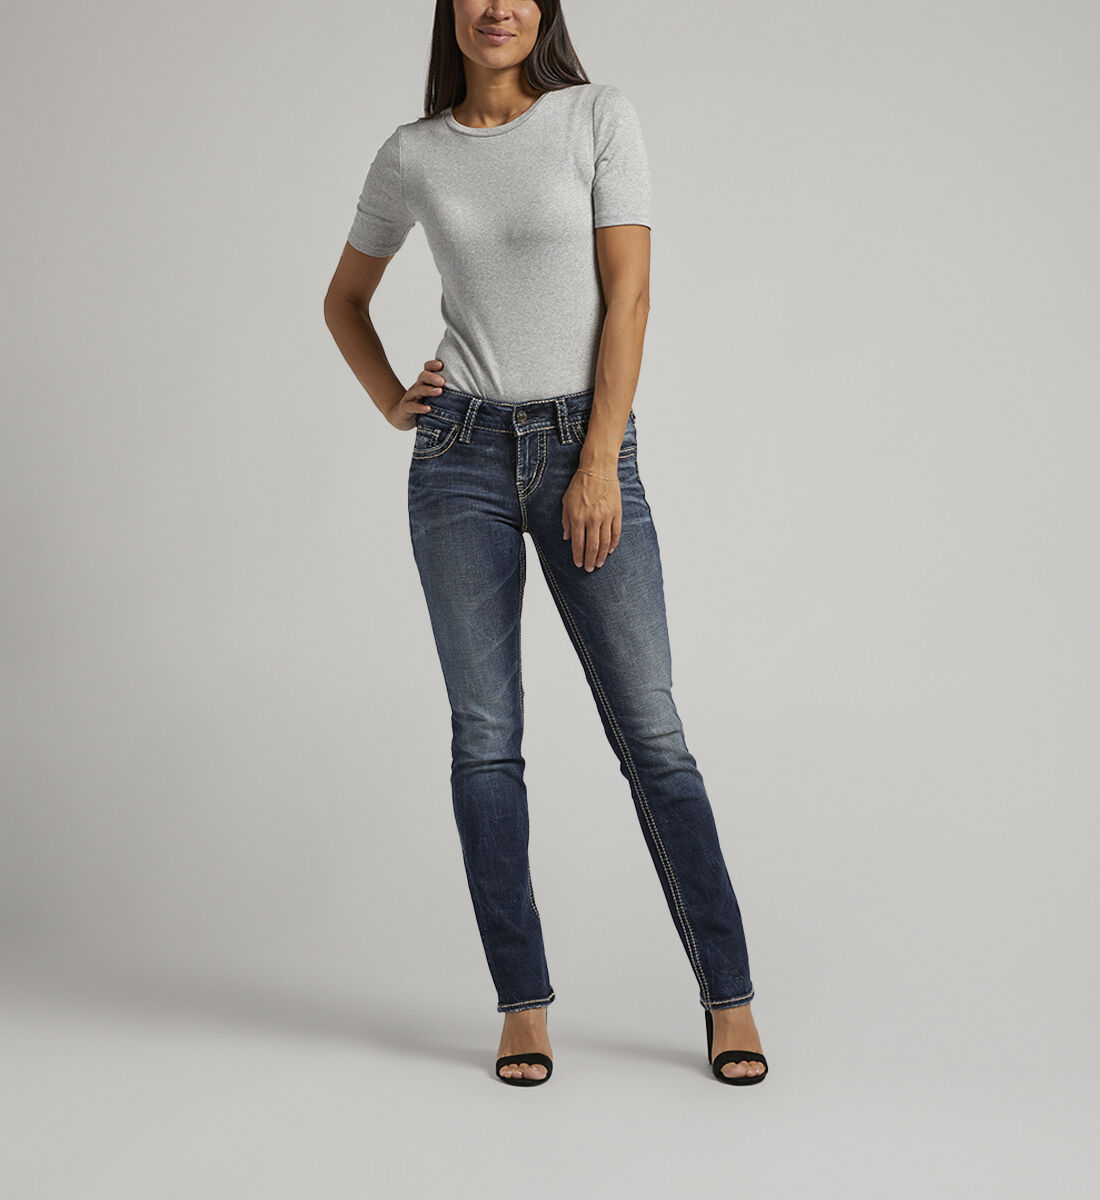 Women's Mid Rise Jeans | Silver Jeans Co.